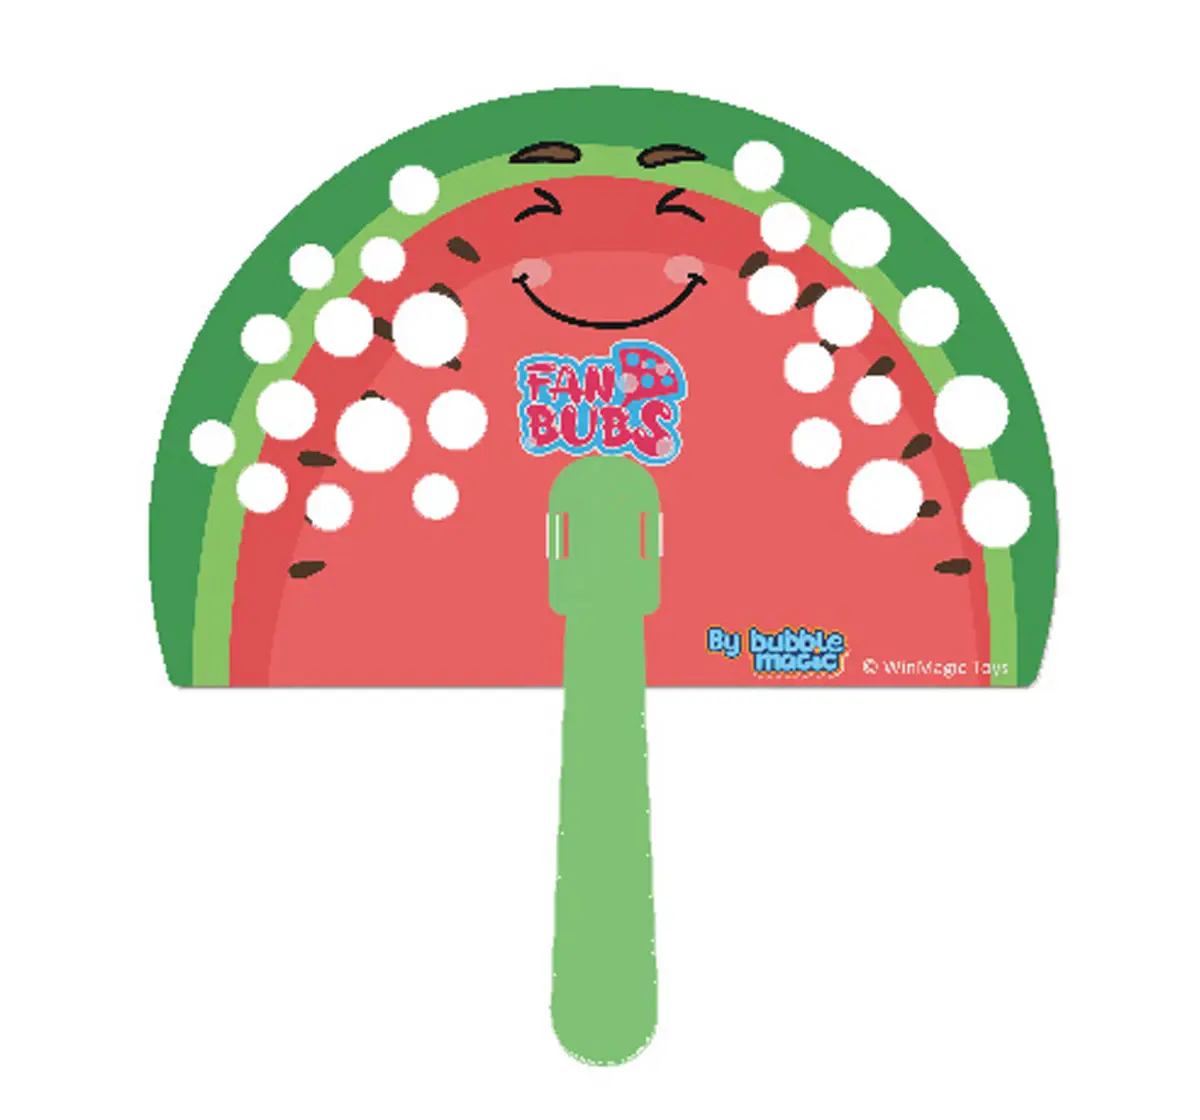 Bubble Magic Fan Bubs Watermelon, for The Kids 3 Years and Above